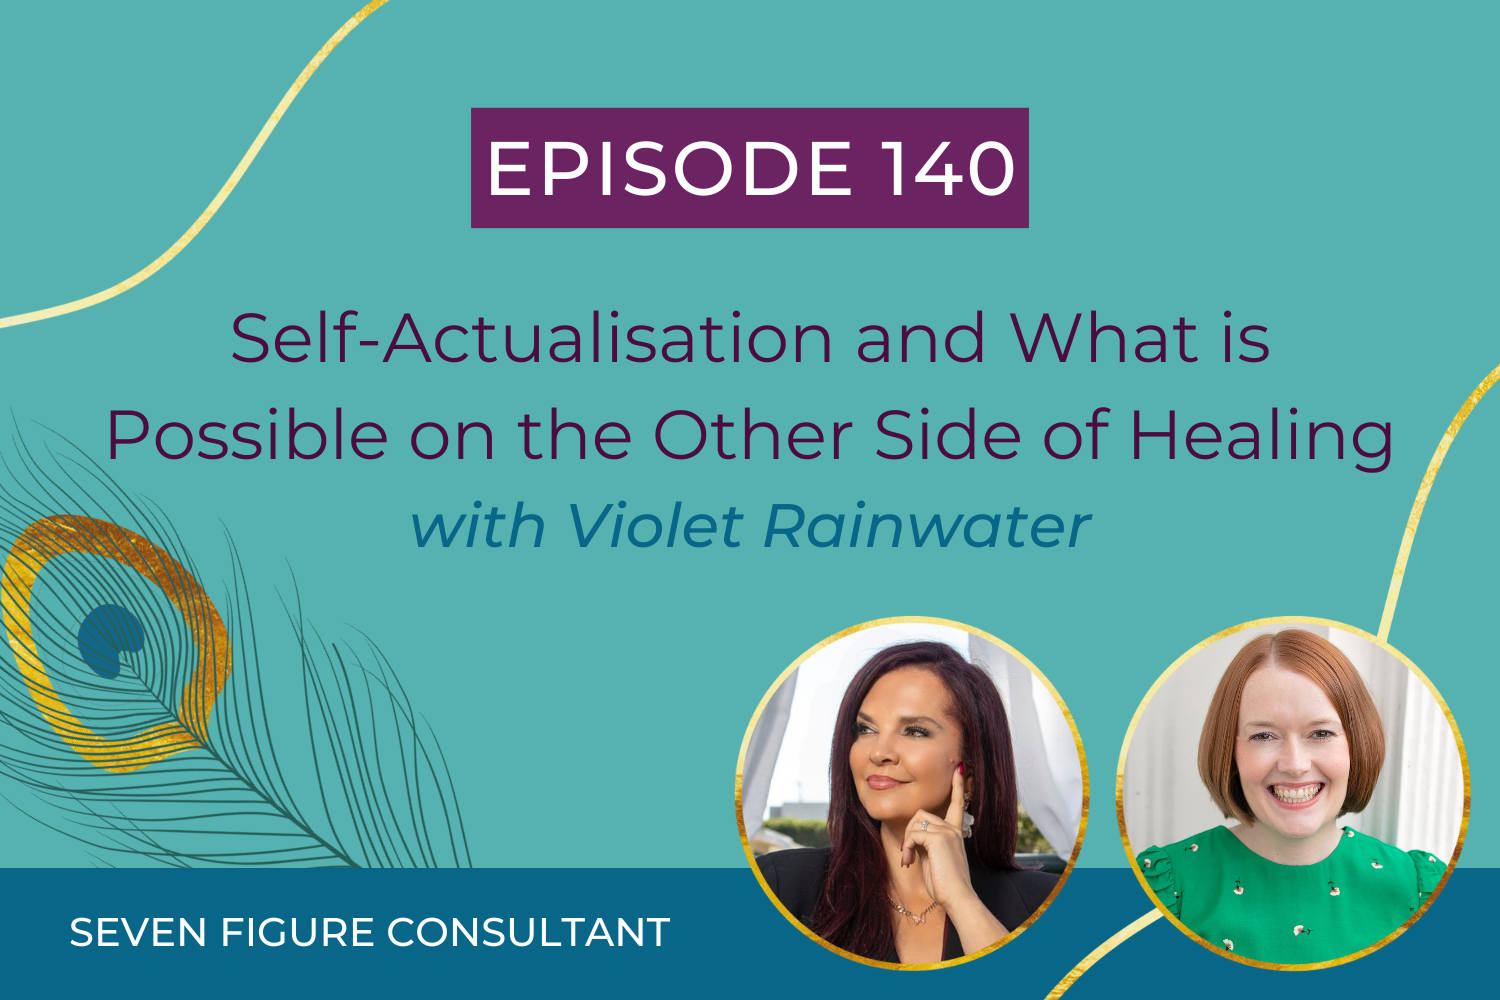 You are currently viewing Episode 140: Self-Actualisation and What is Possible on the Other Side of Healing with Violet Rainwater